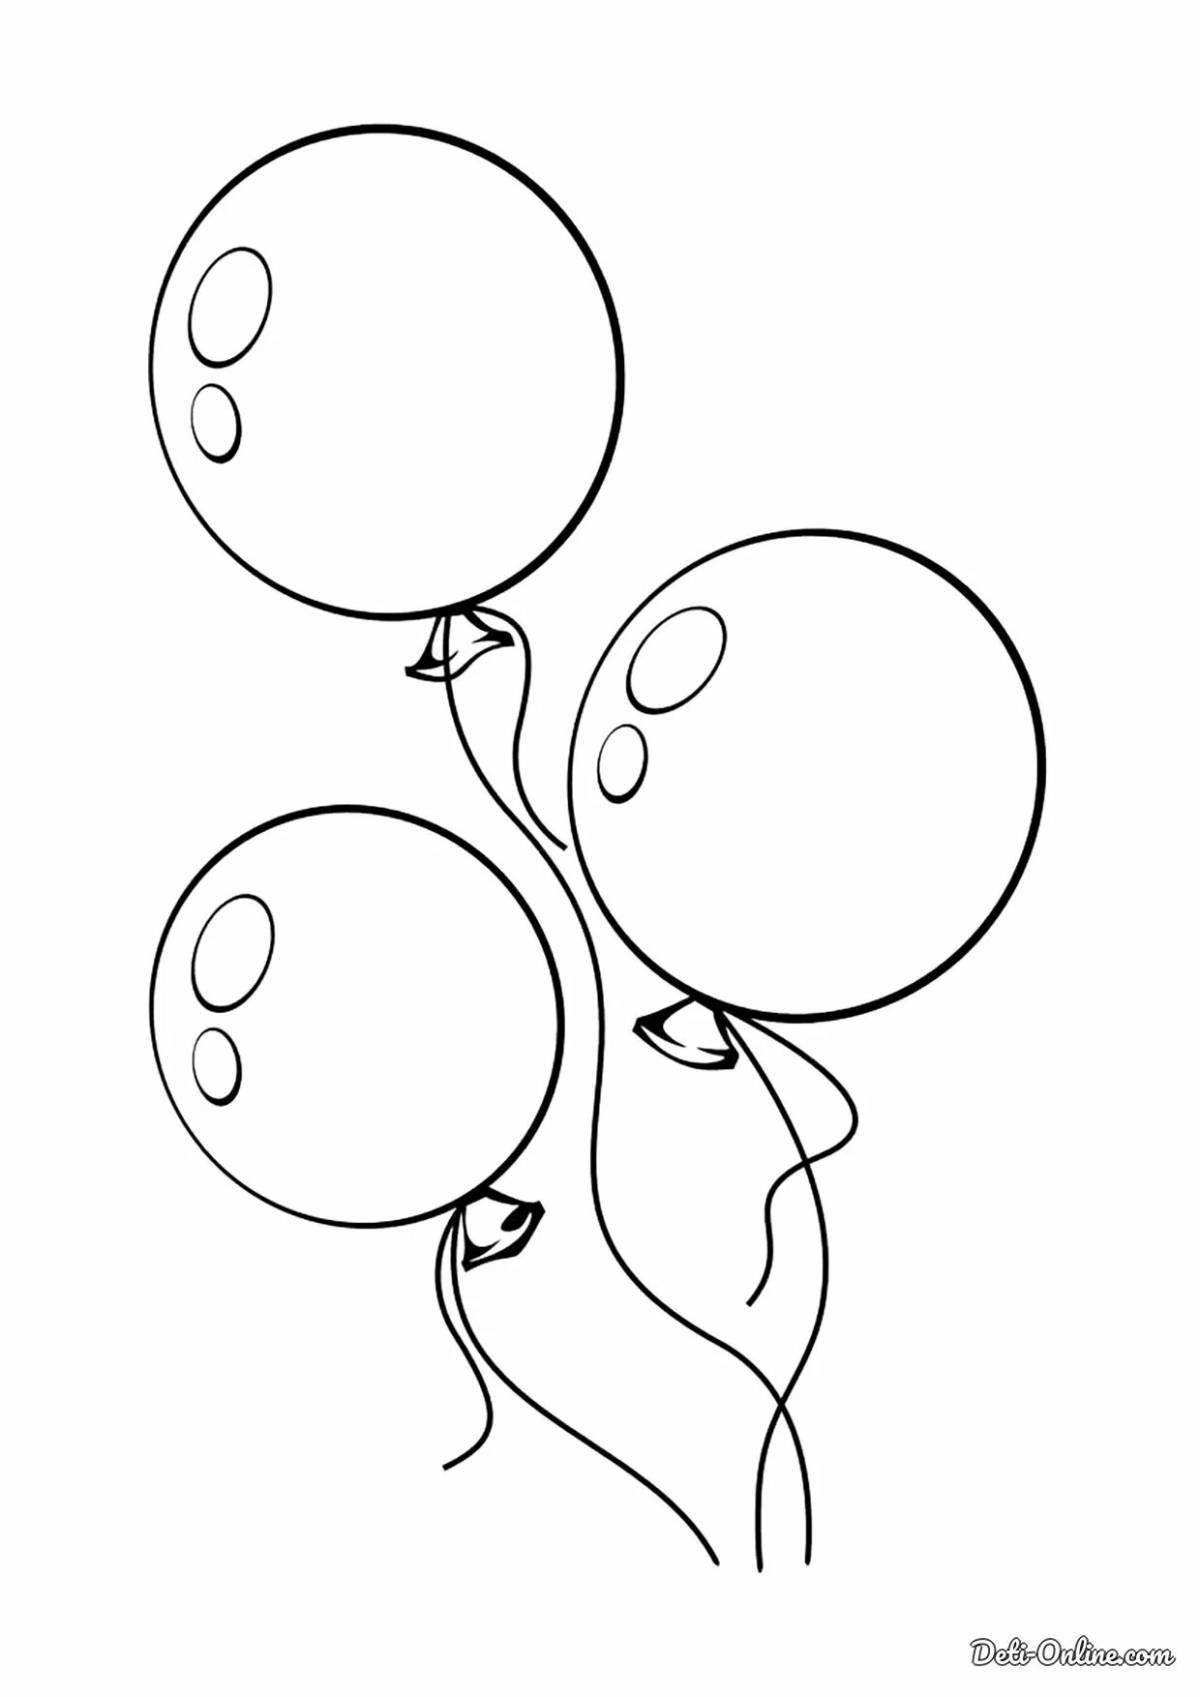 Great balloons coloring book for 3-4 year olds